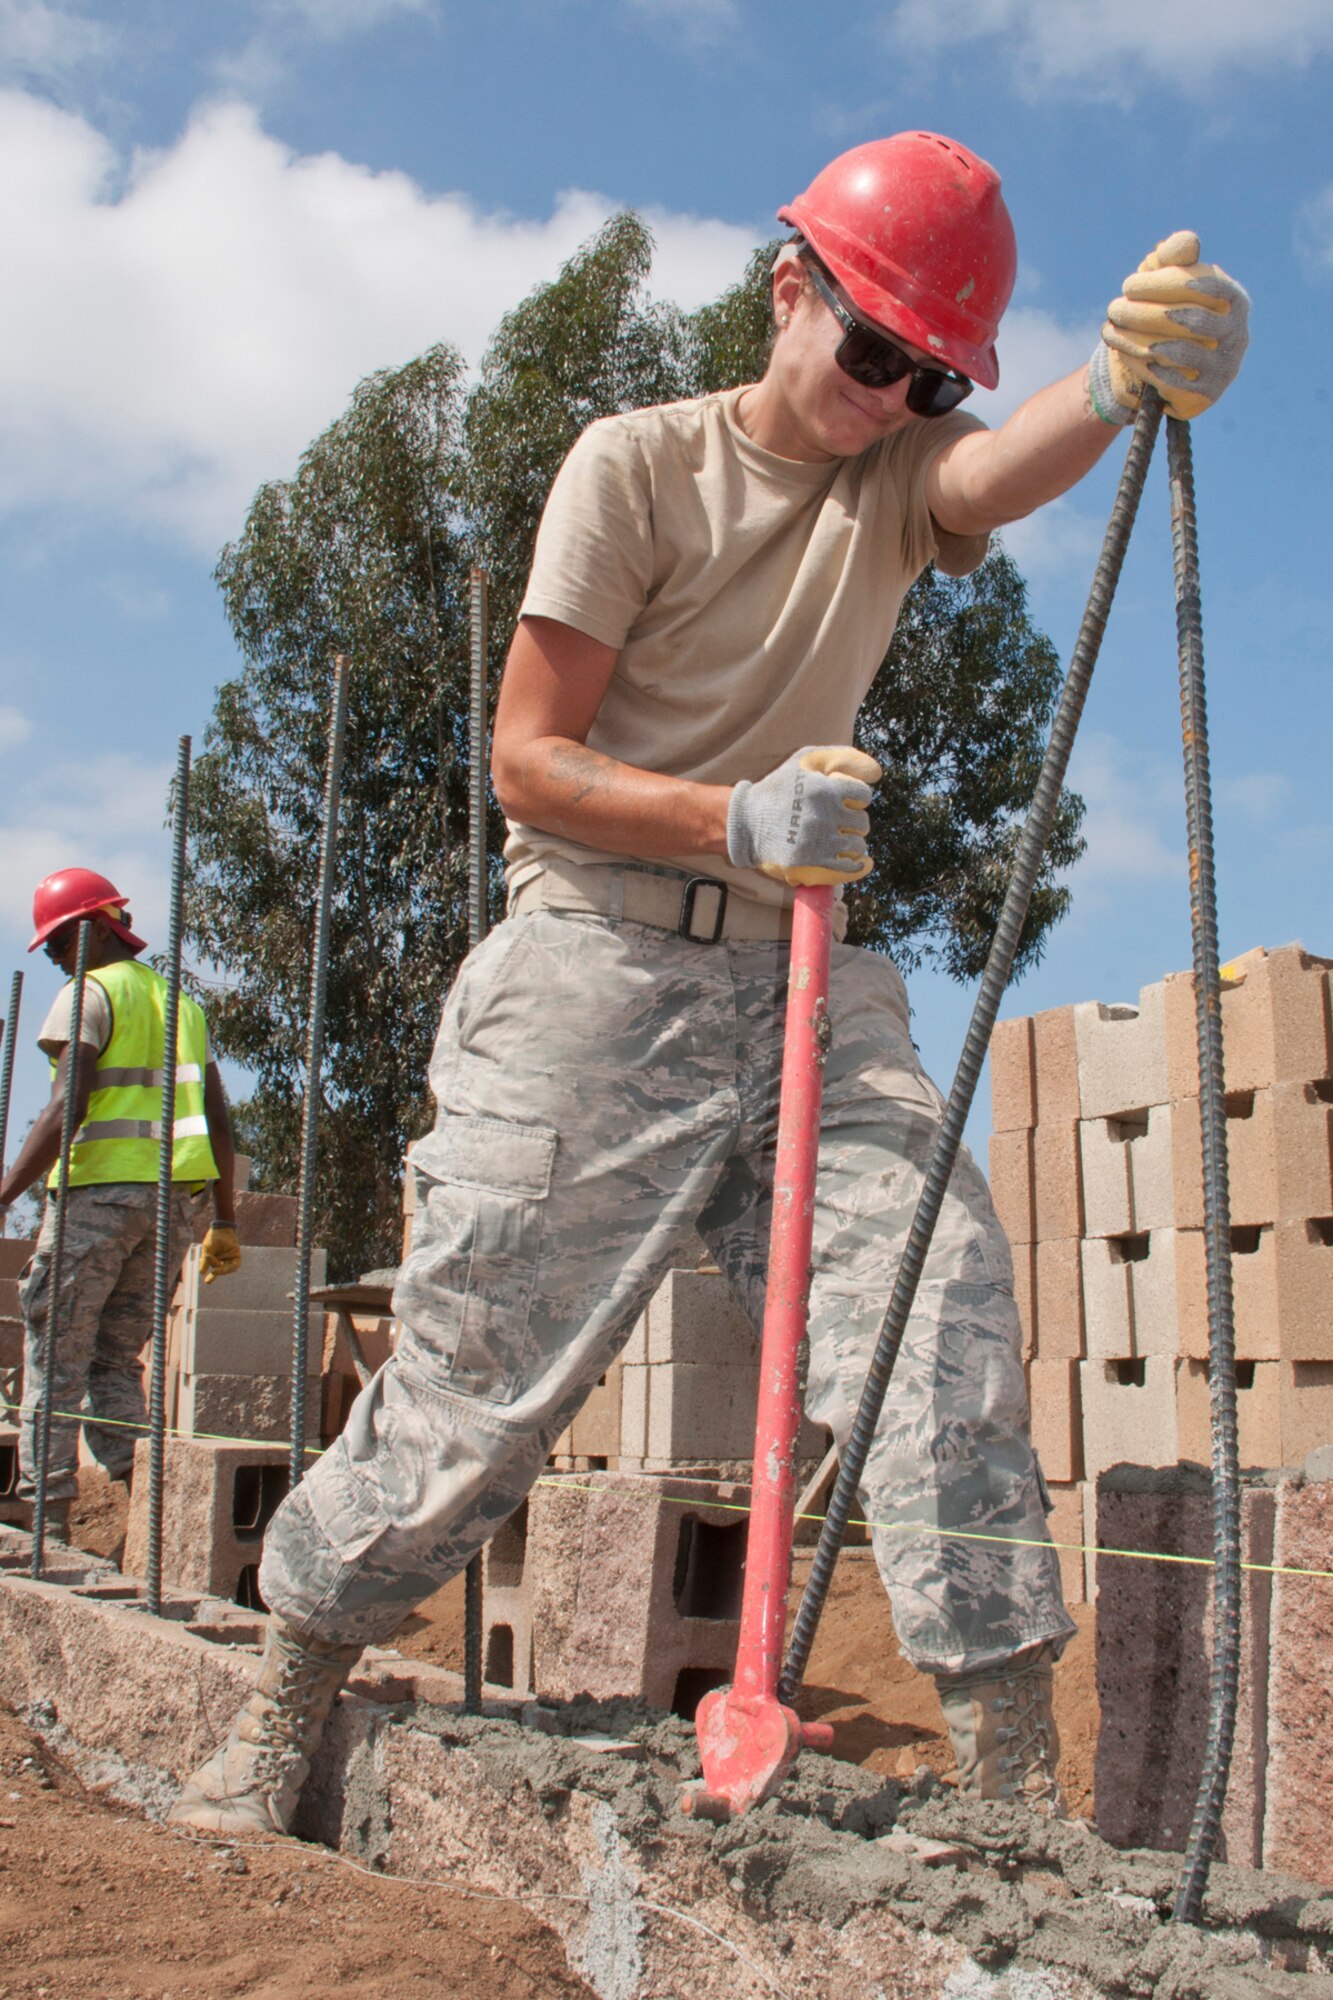 U.S. Air Force Senior Airman Amber Craig, a structural civil engineer assigned to the 555th RED HORSE Squadron at Nellis Air Force Base, Nev., bends rebar for a perimeter wall being constructed for Training, Education, Research and Innovation (TERI) Inc., in San Marcos, Calif., June 10, 2015. The project is one of many civil-military Innovative Readiness Training programs, (IRT) which are conducted within the U.S., its territories and possessions by our military, especially our Guard and Reserve forces. (U.S. Air Force photo by Master Sgt. Jeff Walston)